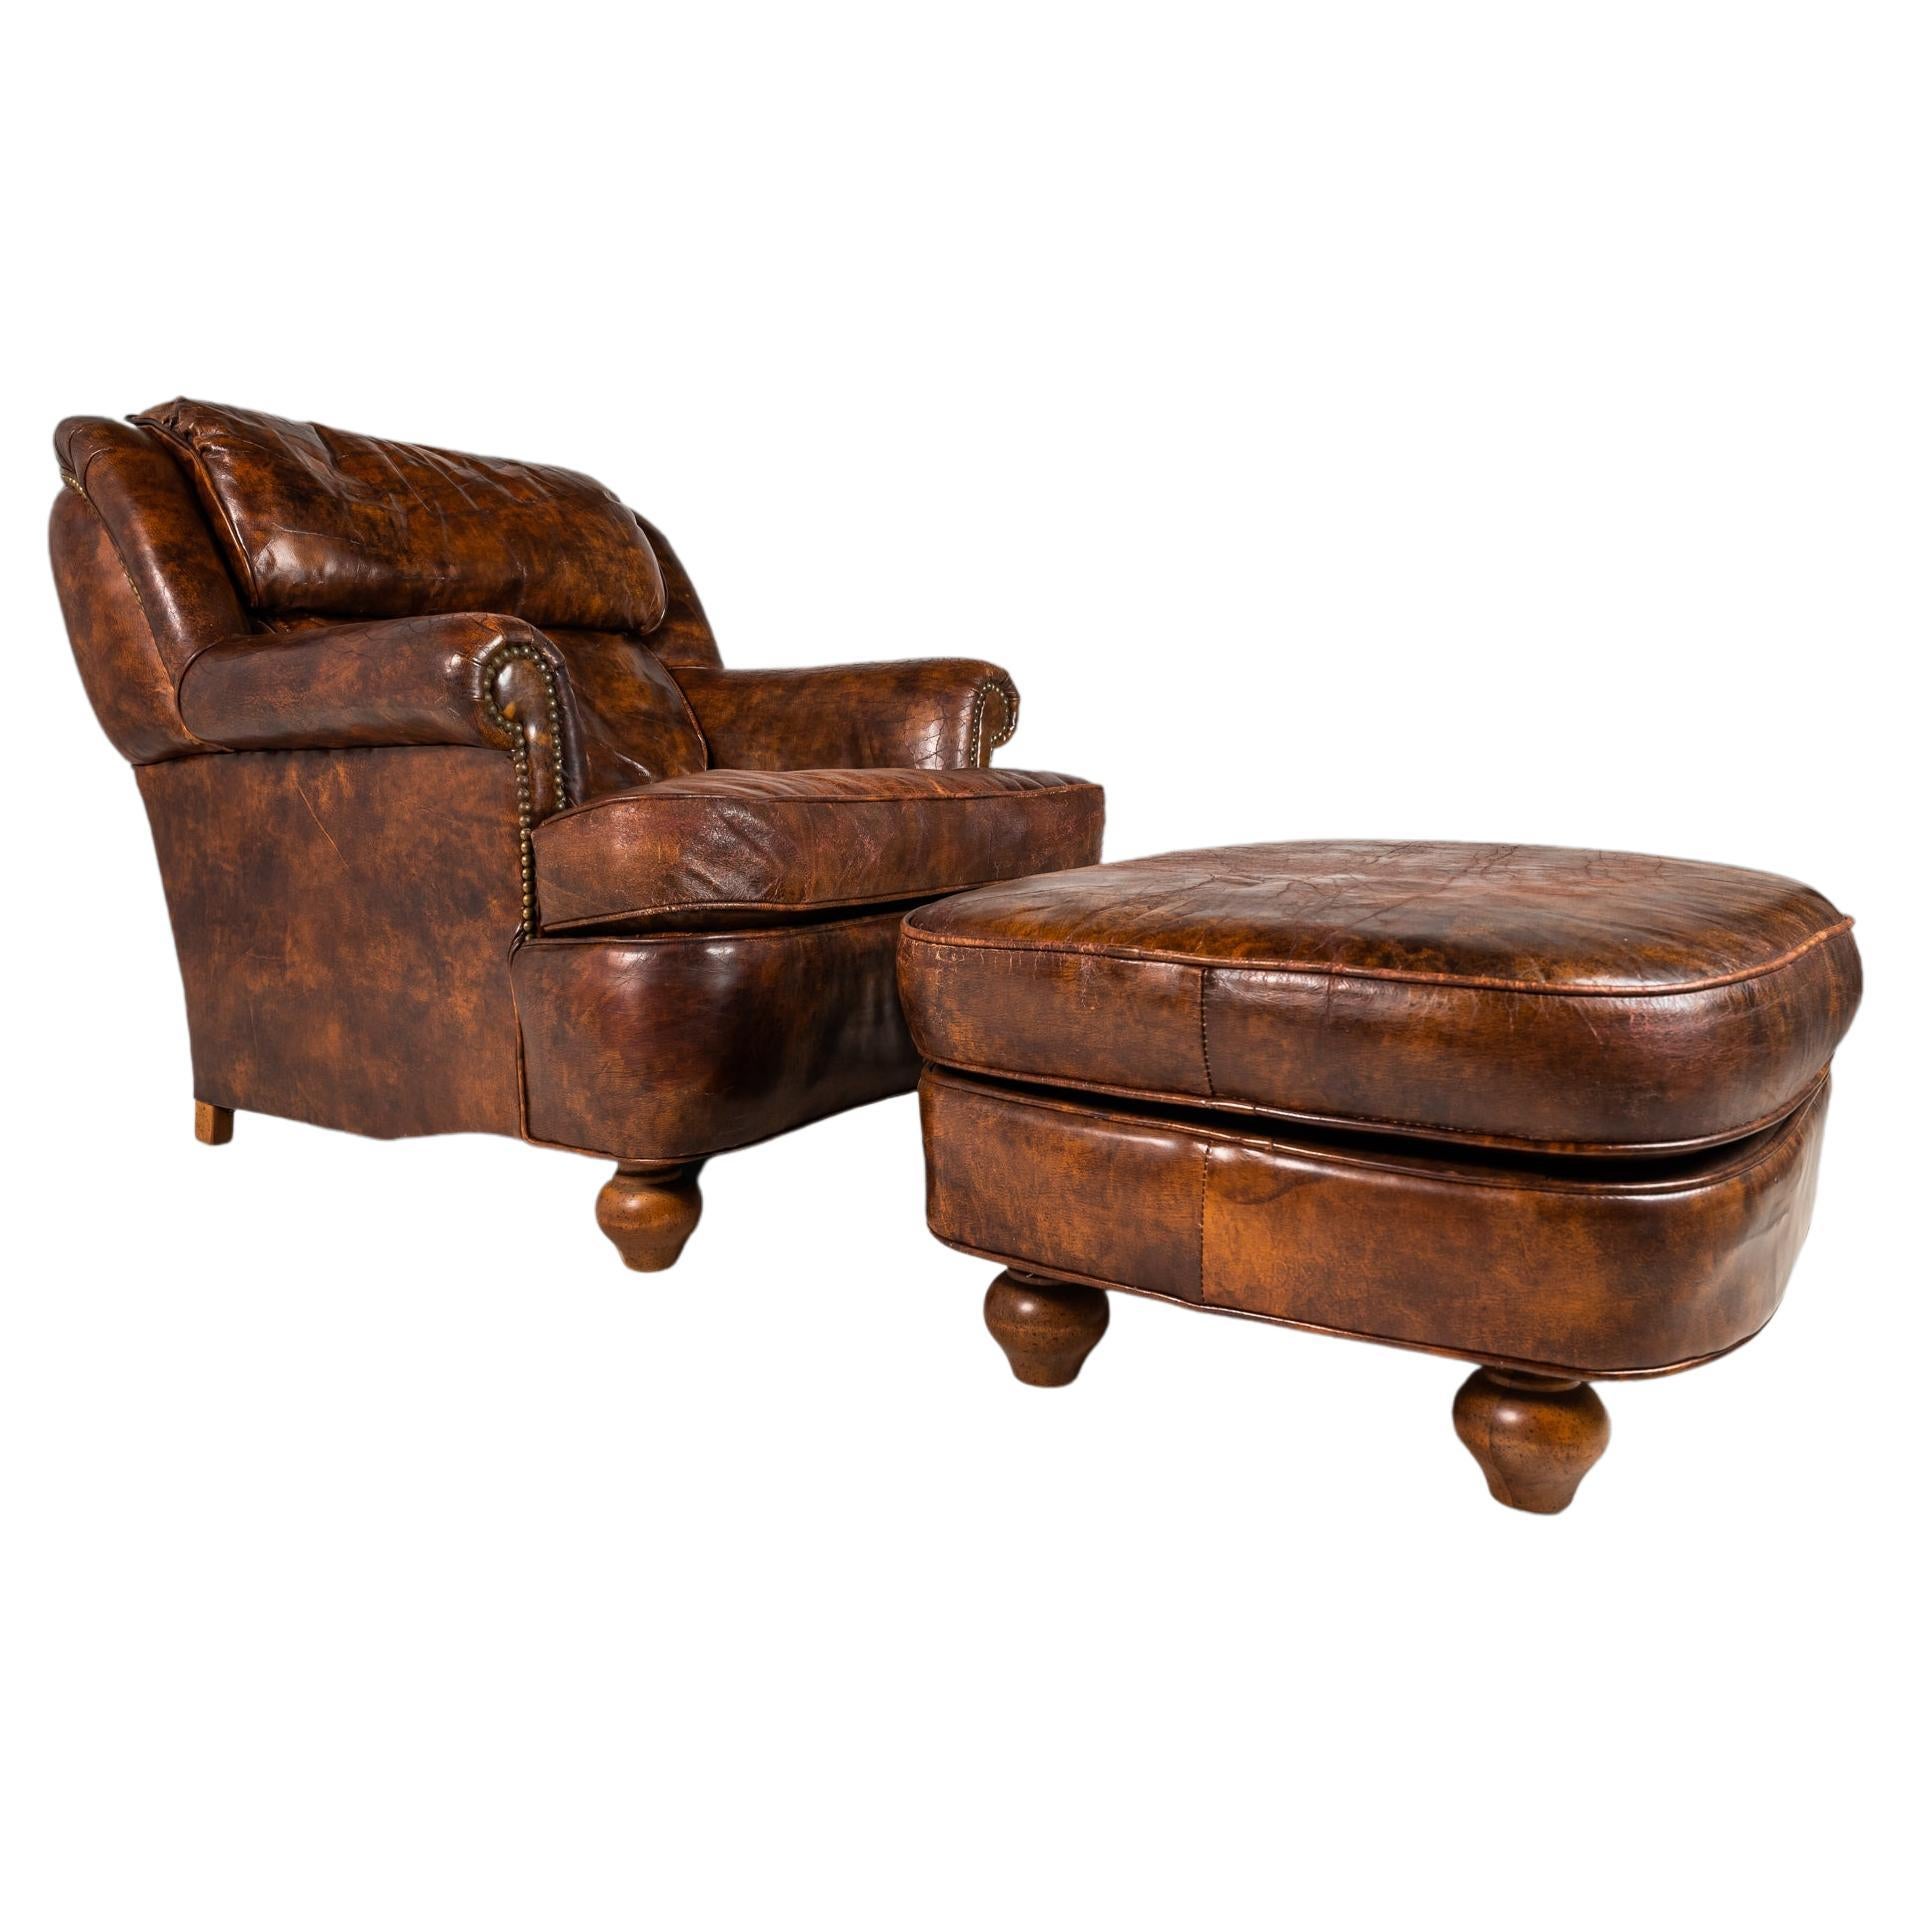 Patinaed French Club Chair Cigar Chair & Ottoman in Distressed Leather c. 1940s For Sale